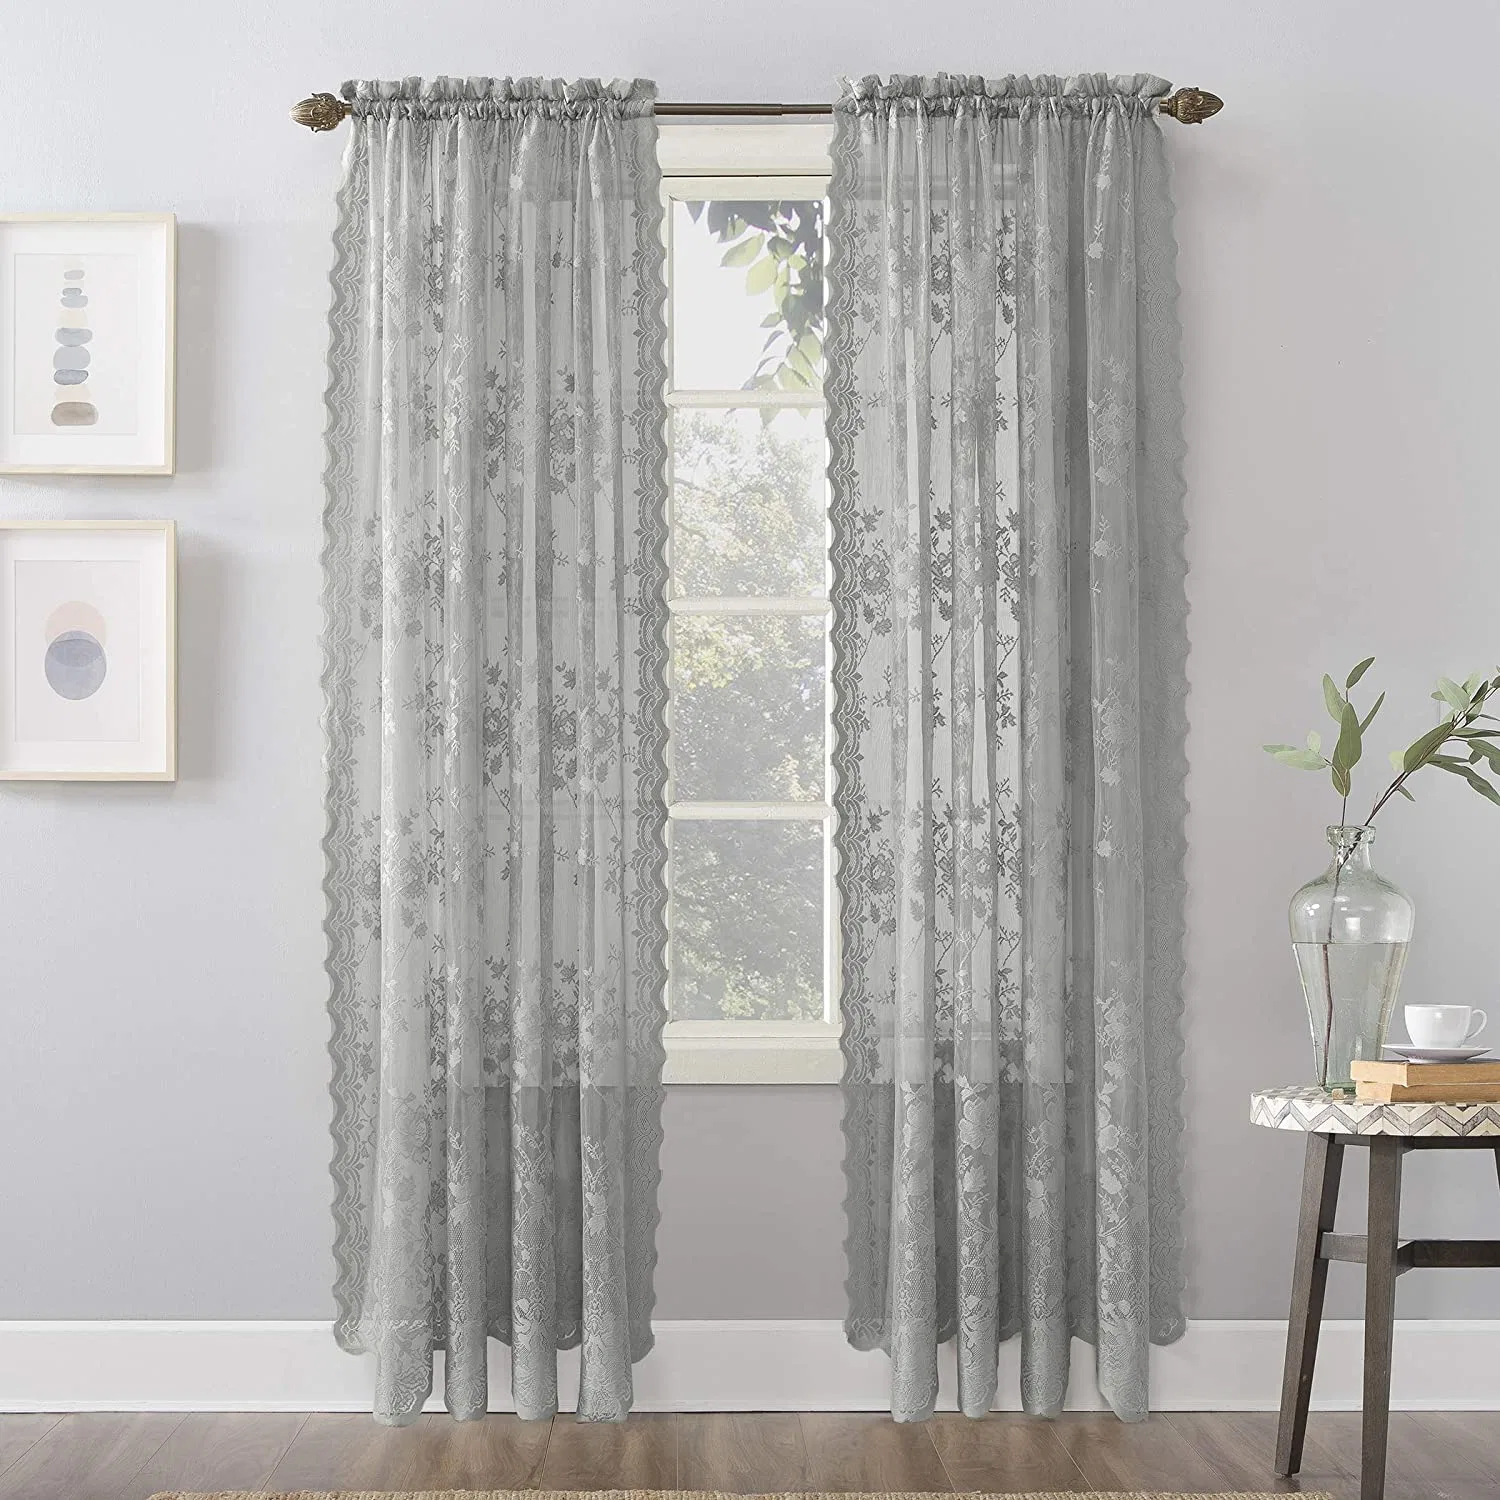 High-Grade Grey Embroidery Flower Screens European Style Lace Curtain Sheer for Bedroom Living Room